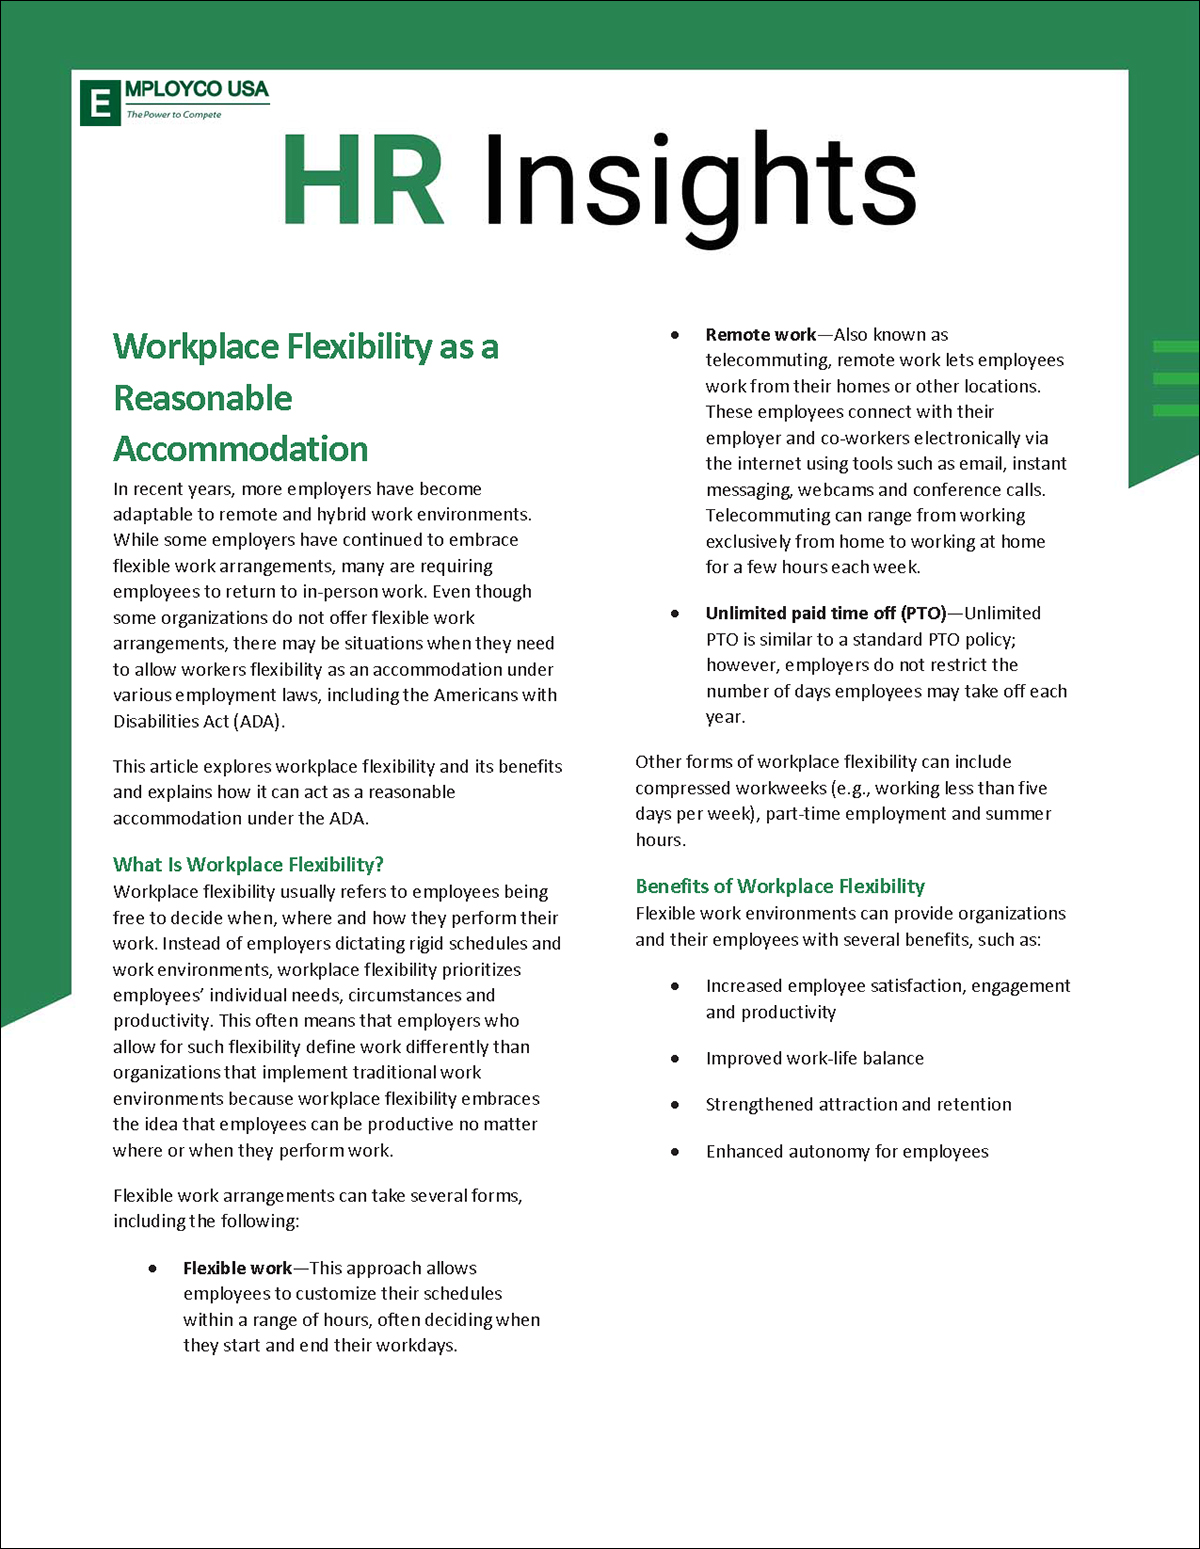 HR Insights - Workplace Flexibility as a Reasonable Accommodation